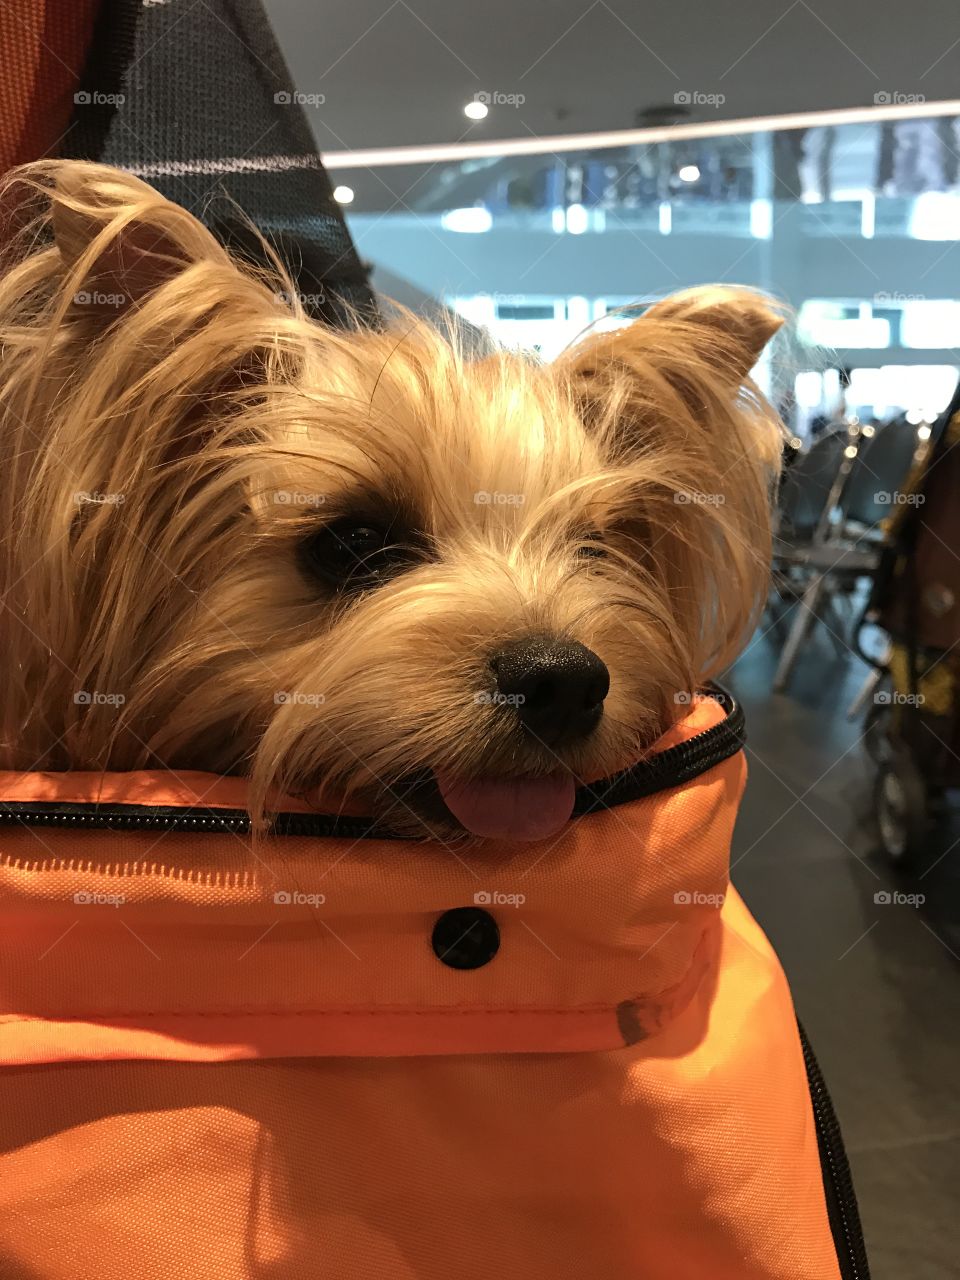 My dog is in a naughty moment in the carriage, it’s hang out and fun. nose, mouth and tongue of my dog. (yorkshire terrier)